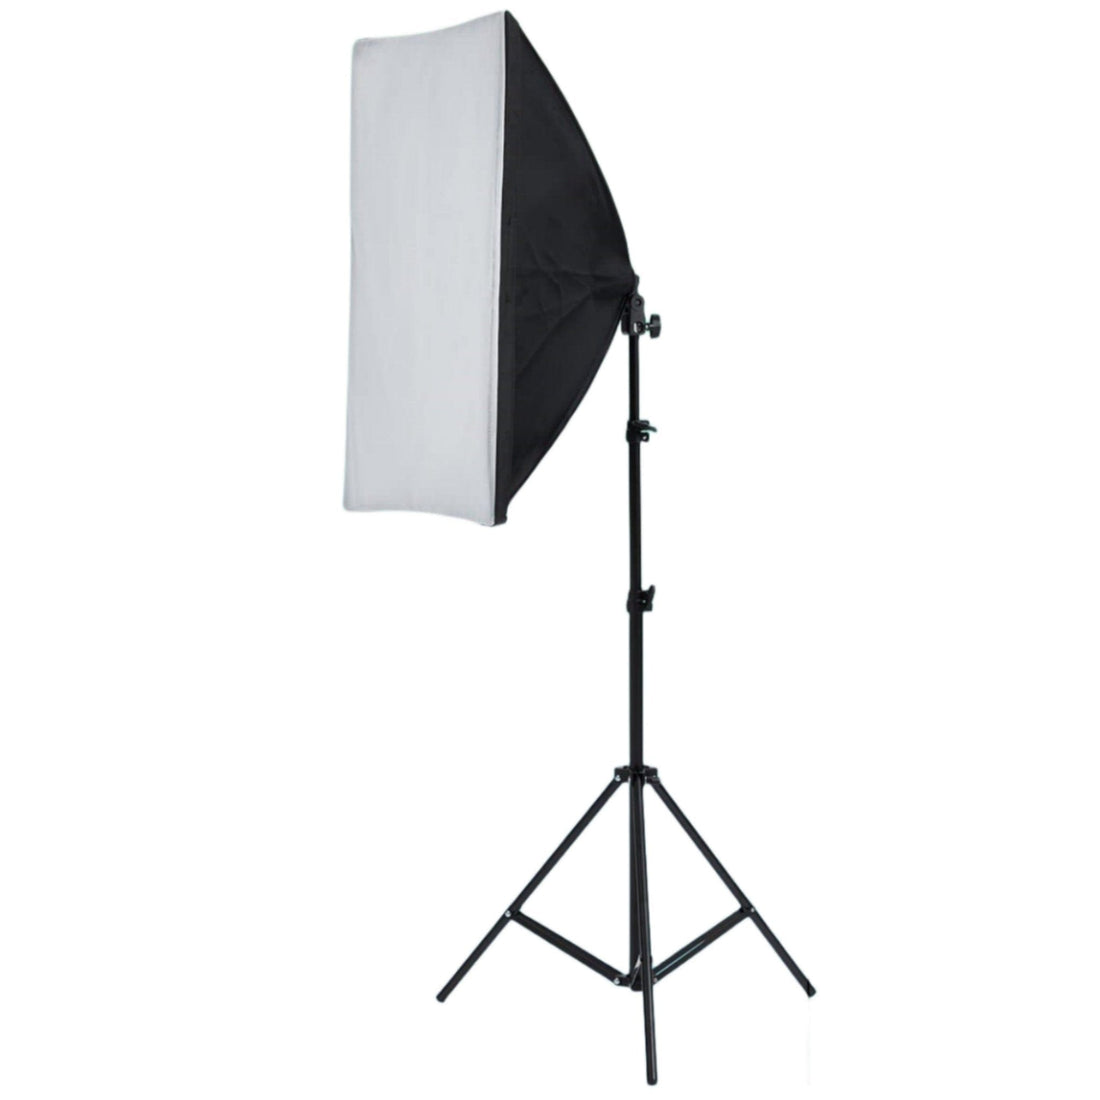 8.5x10ft Photography Kit with Backdrops for Portrait Shoots - GARVEE